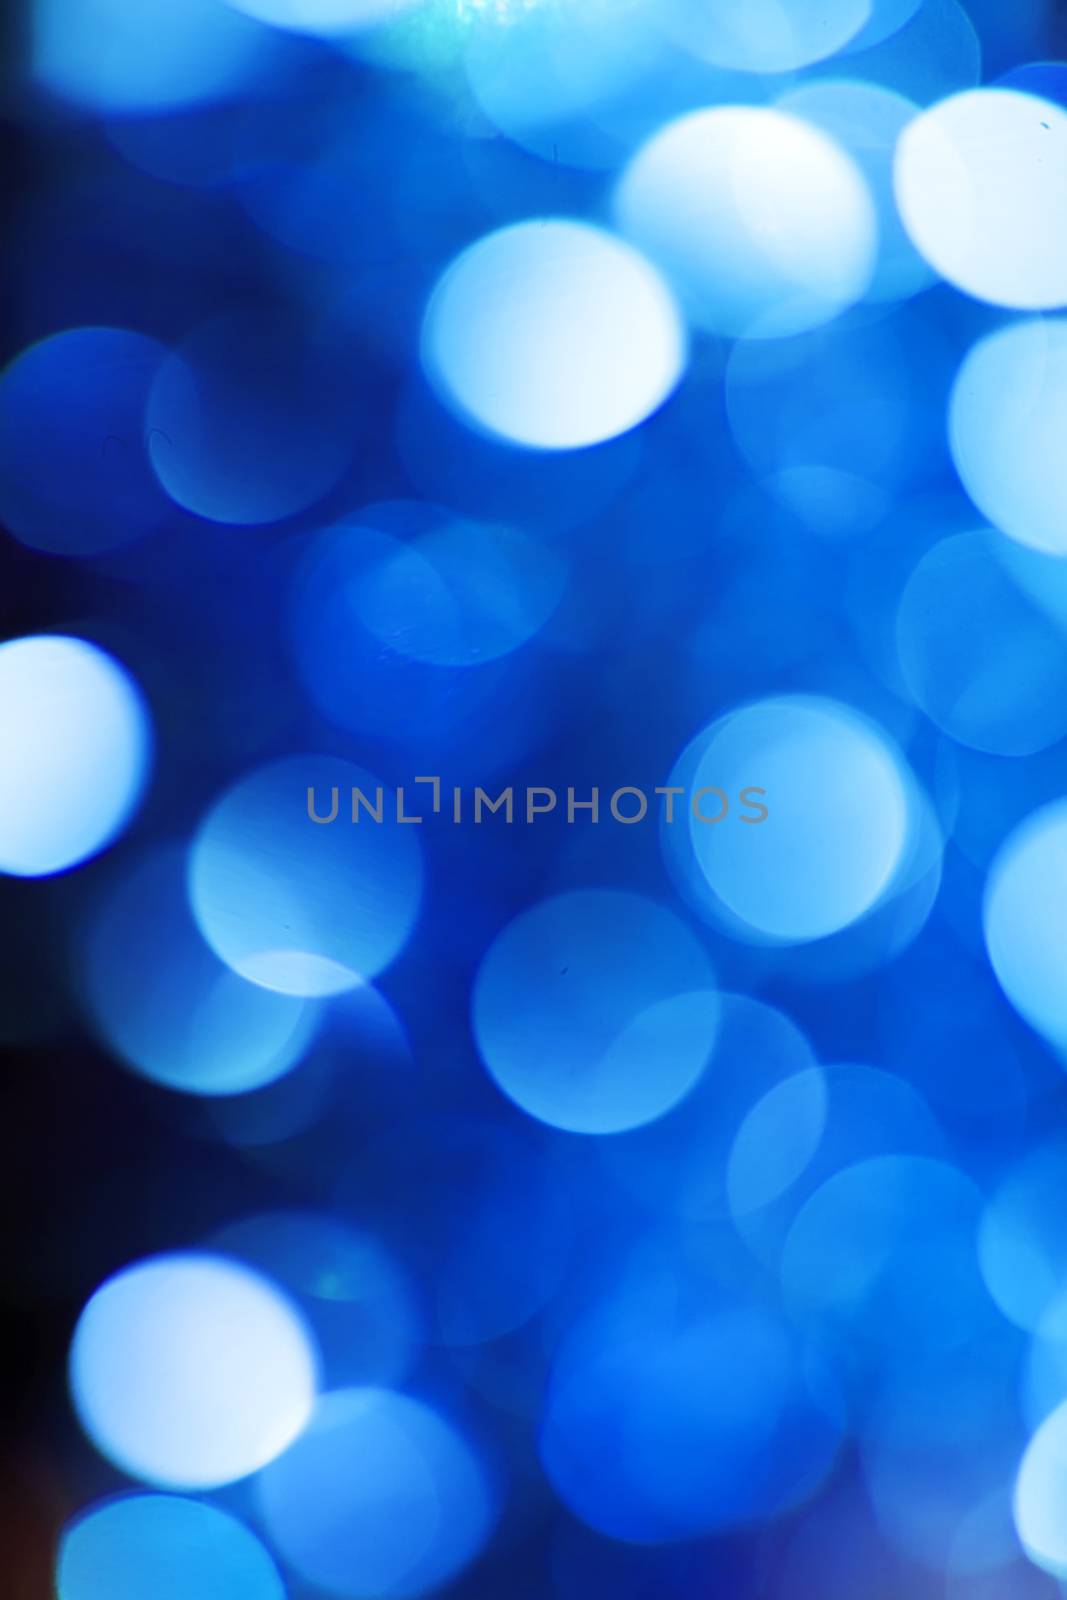 Abstract christmas background. Holiday colored lights unfocused